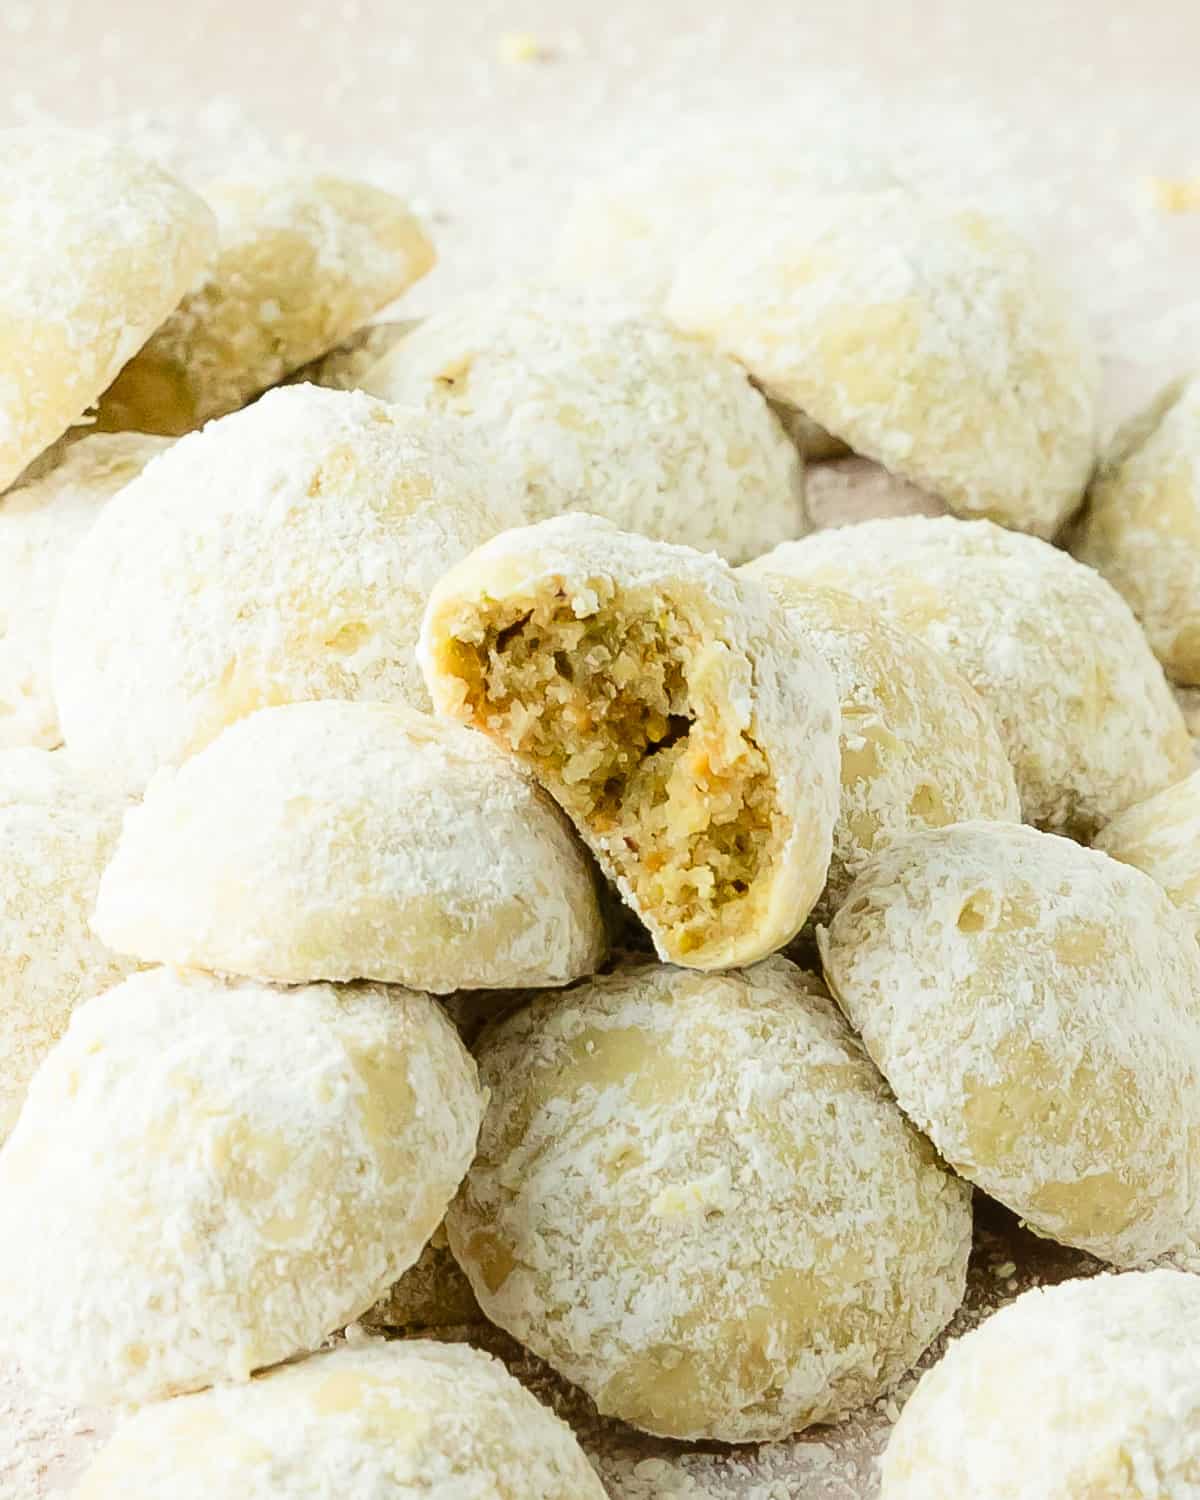 Pistachio cookies are thick, soft and buttery drop cookies made with real pistachios. These pistachio drop cookies are coated in powdered sugar giving a fresh flavor twist to the classic snowball cookie. This recipe for pistachio cookies is quick and easy and makes the perfect festive cookie for any occasion.